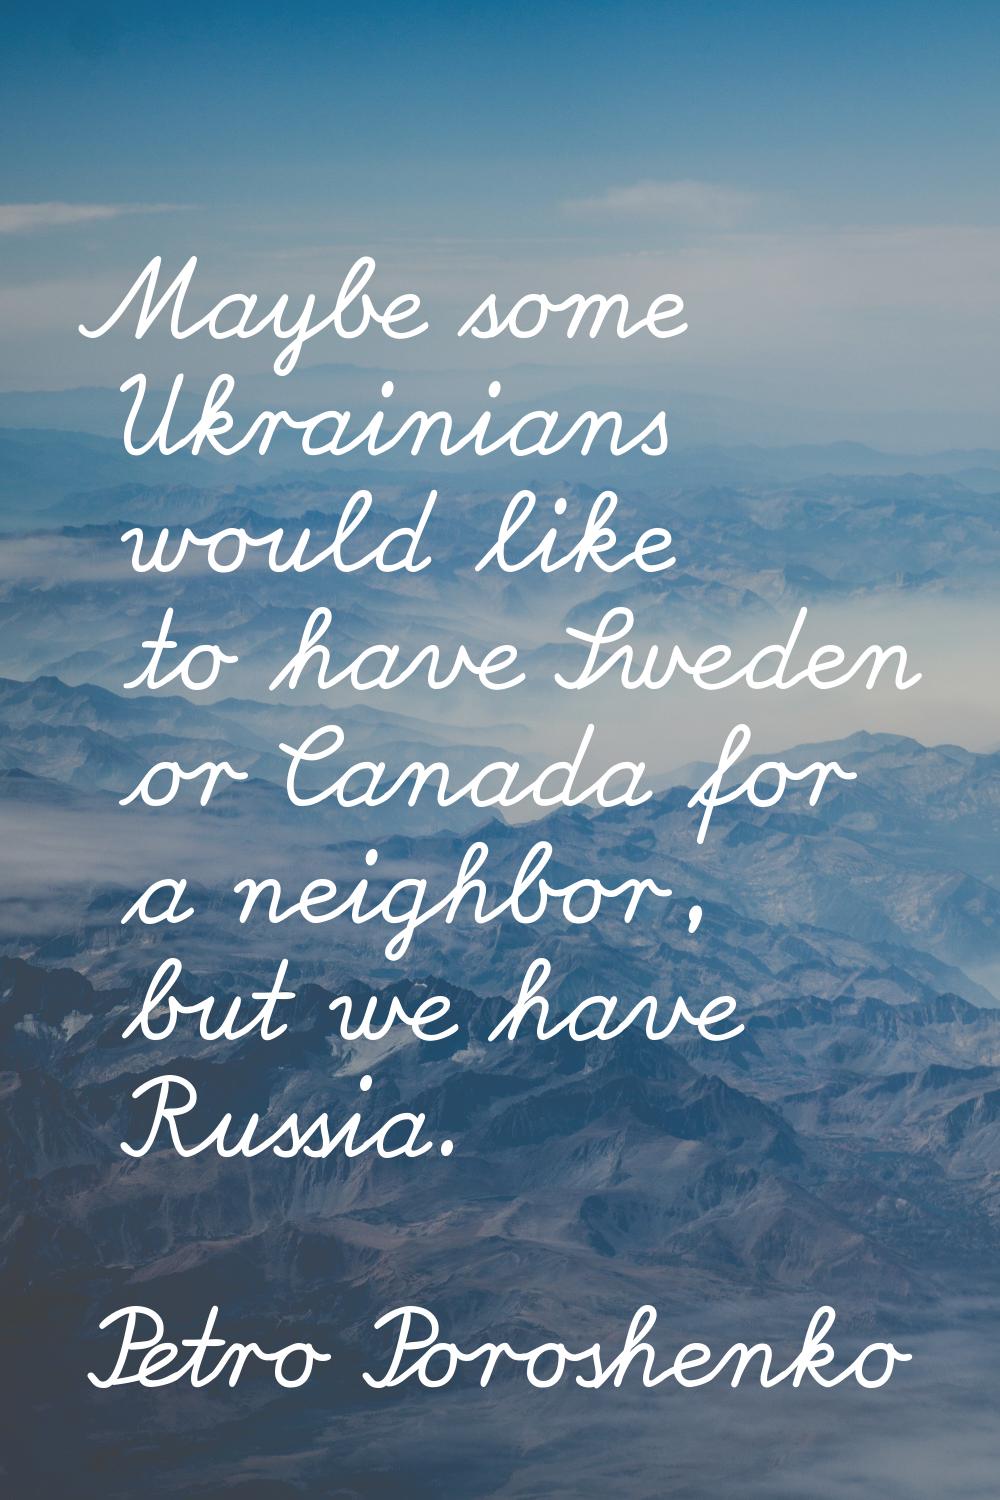 Maybe some Ukrainians would like to have Sweden or Canada for a neighbor, but we have Russia.